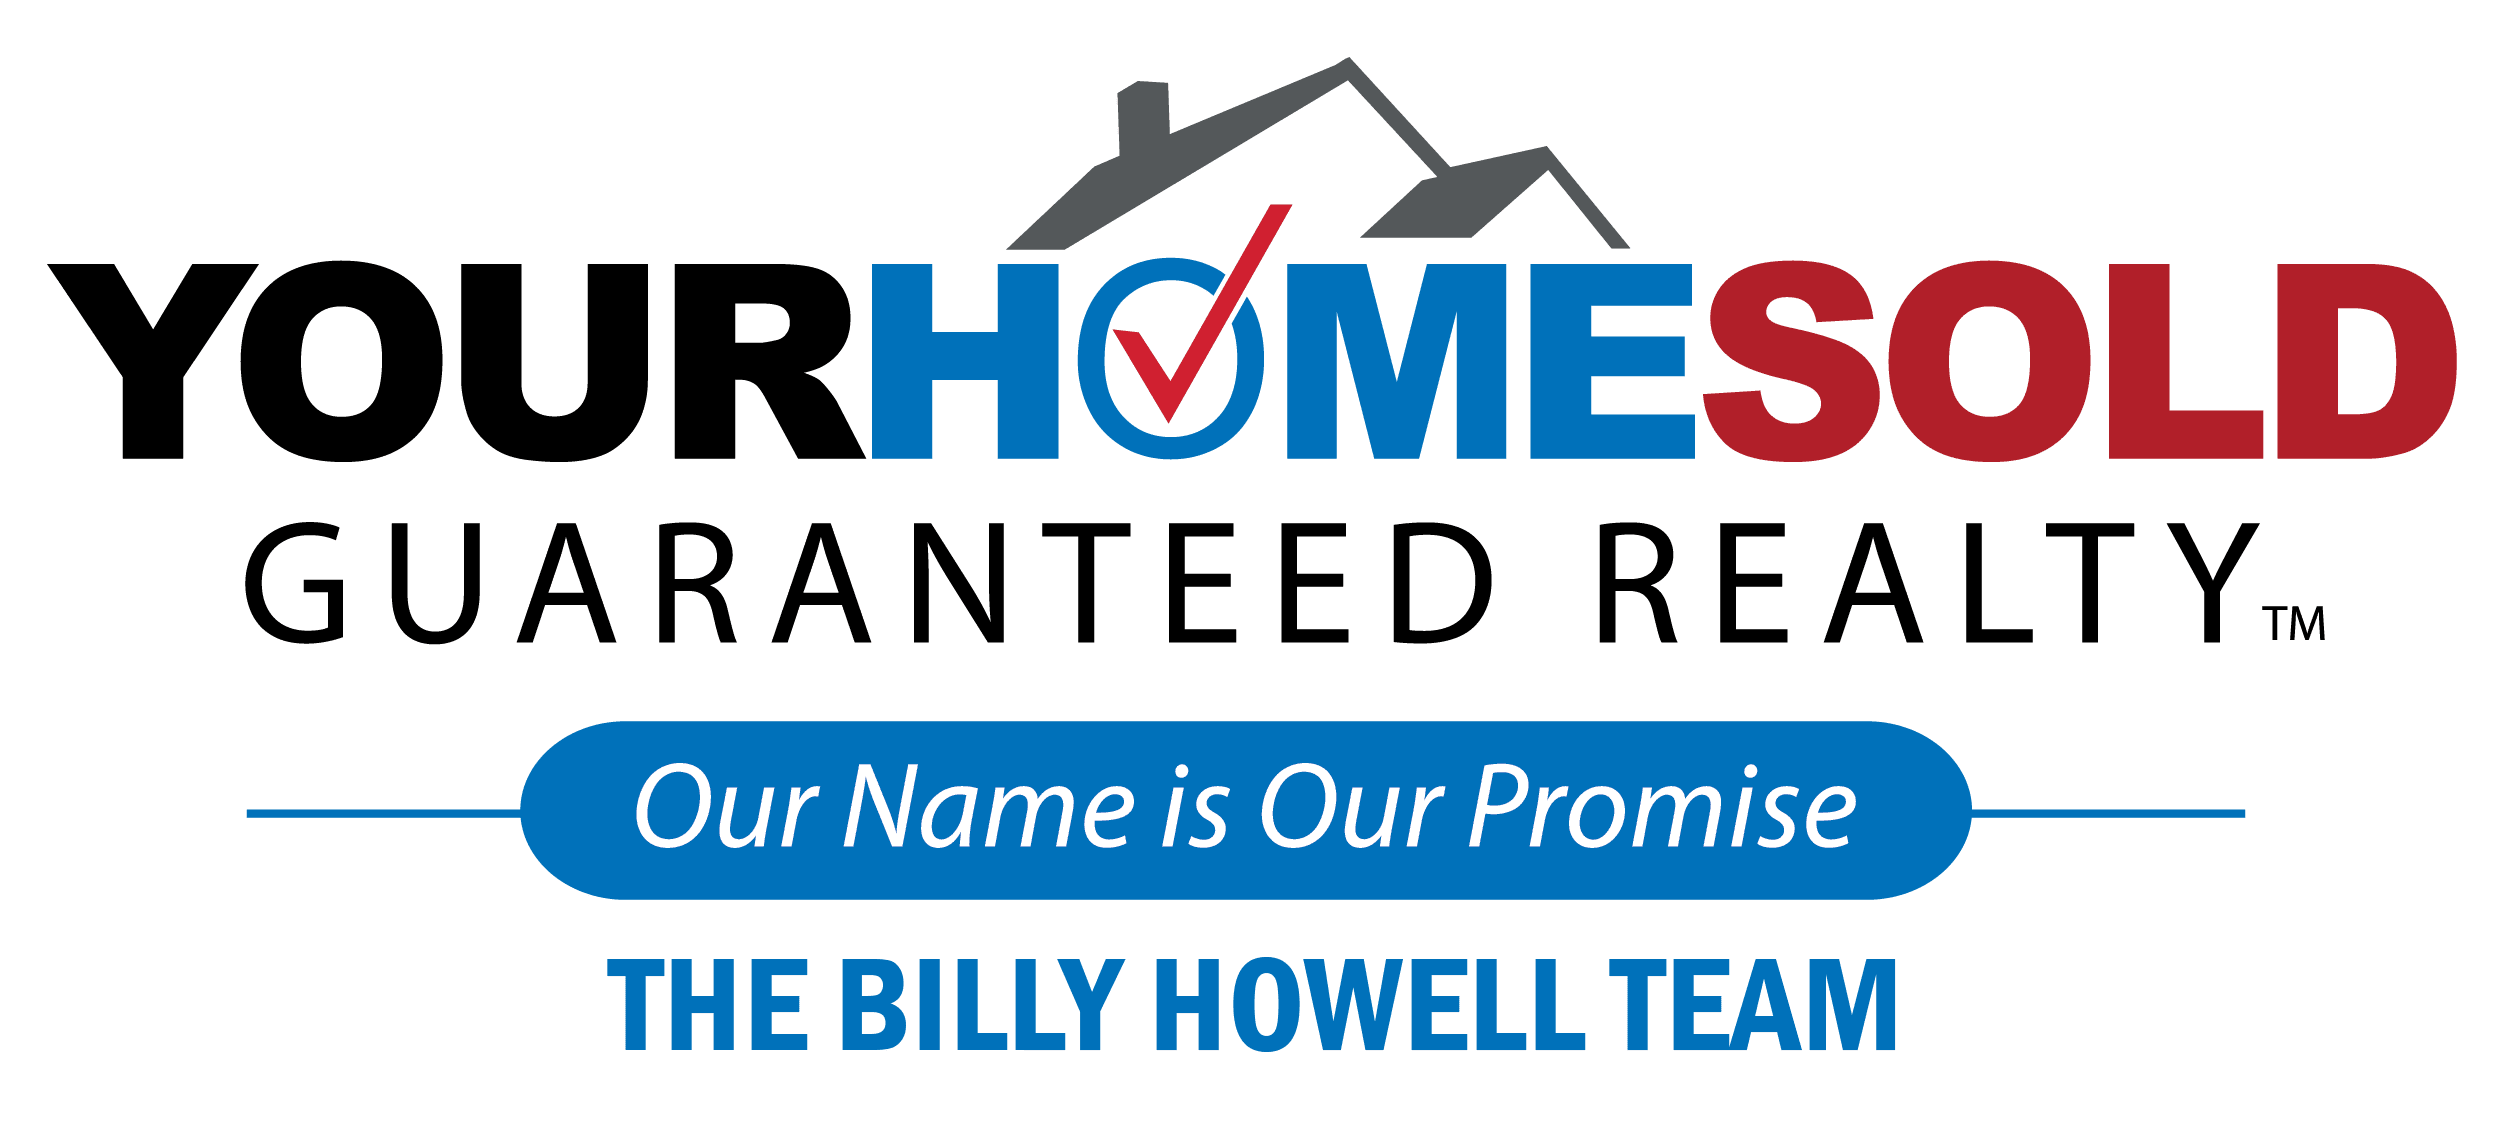 Your Home SOLD Guaranteed Realty Sales